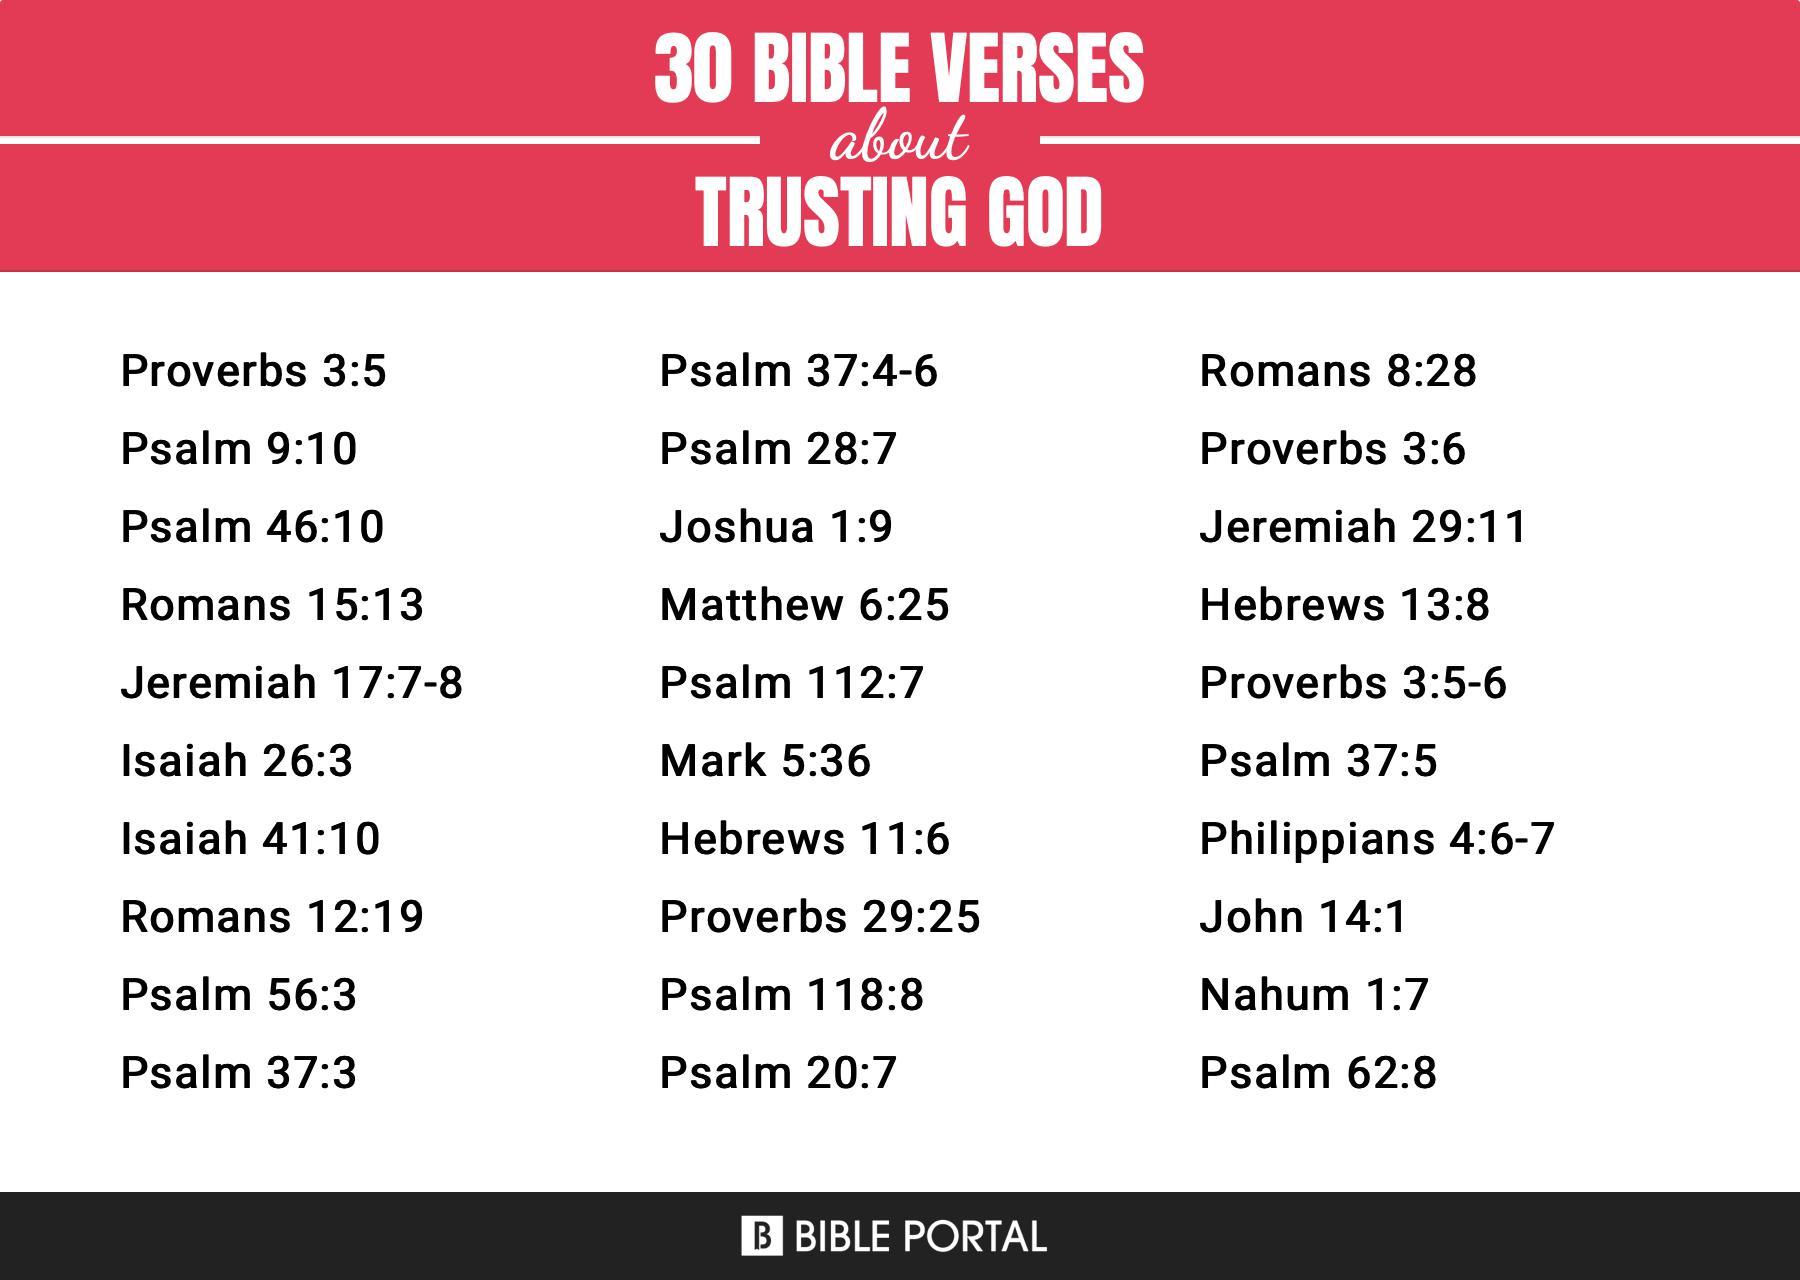 What Does the Bible Say about Trusting God?